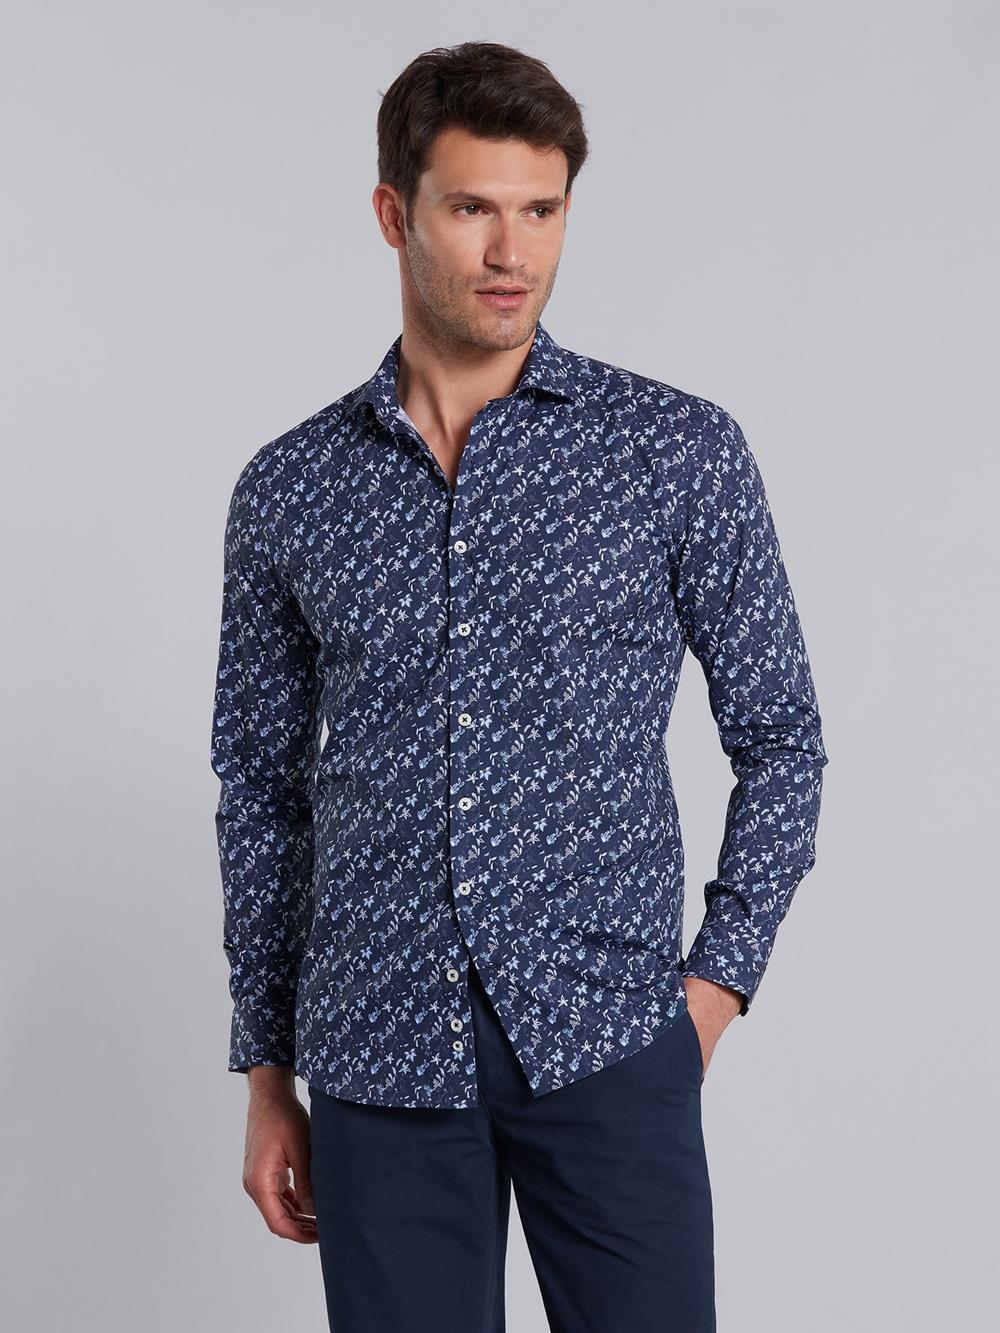 Indigo and white floral printed popelin slim fit shirt - Small Collar